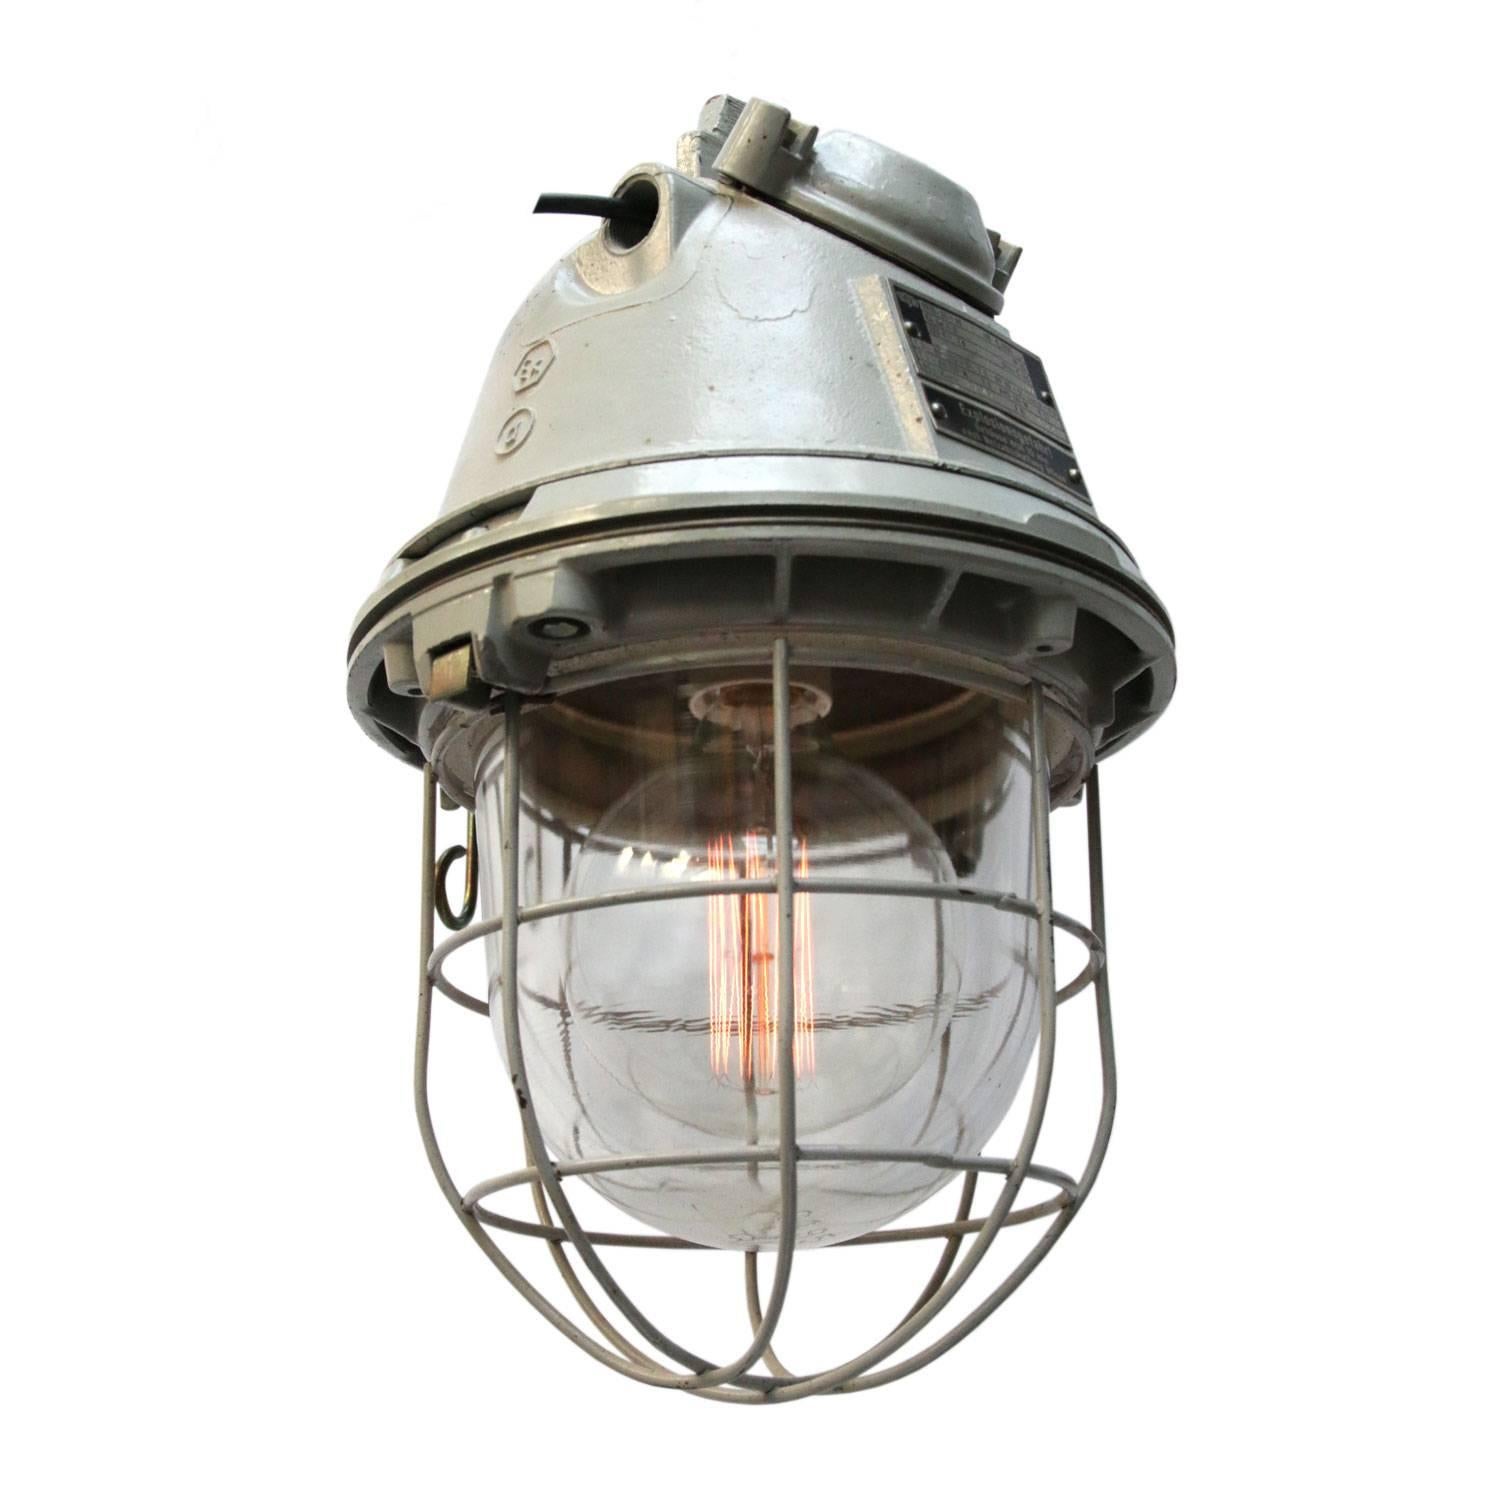 Industrial hanging lamp. Grey cast aluminium.
Clear glass.

Weight: 7.9 kg / 17.4 lb

Priced individual item. All lamps have been made suitable by international standards for incandescent light bulbs, energy-efficient and LED bulbs. E26/E27 bulb